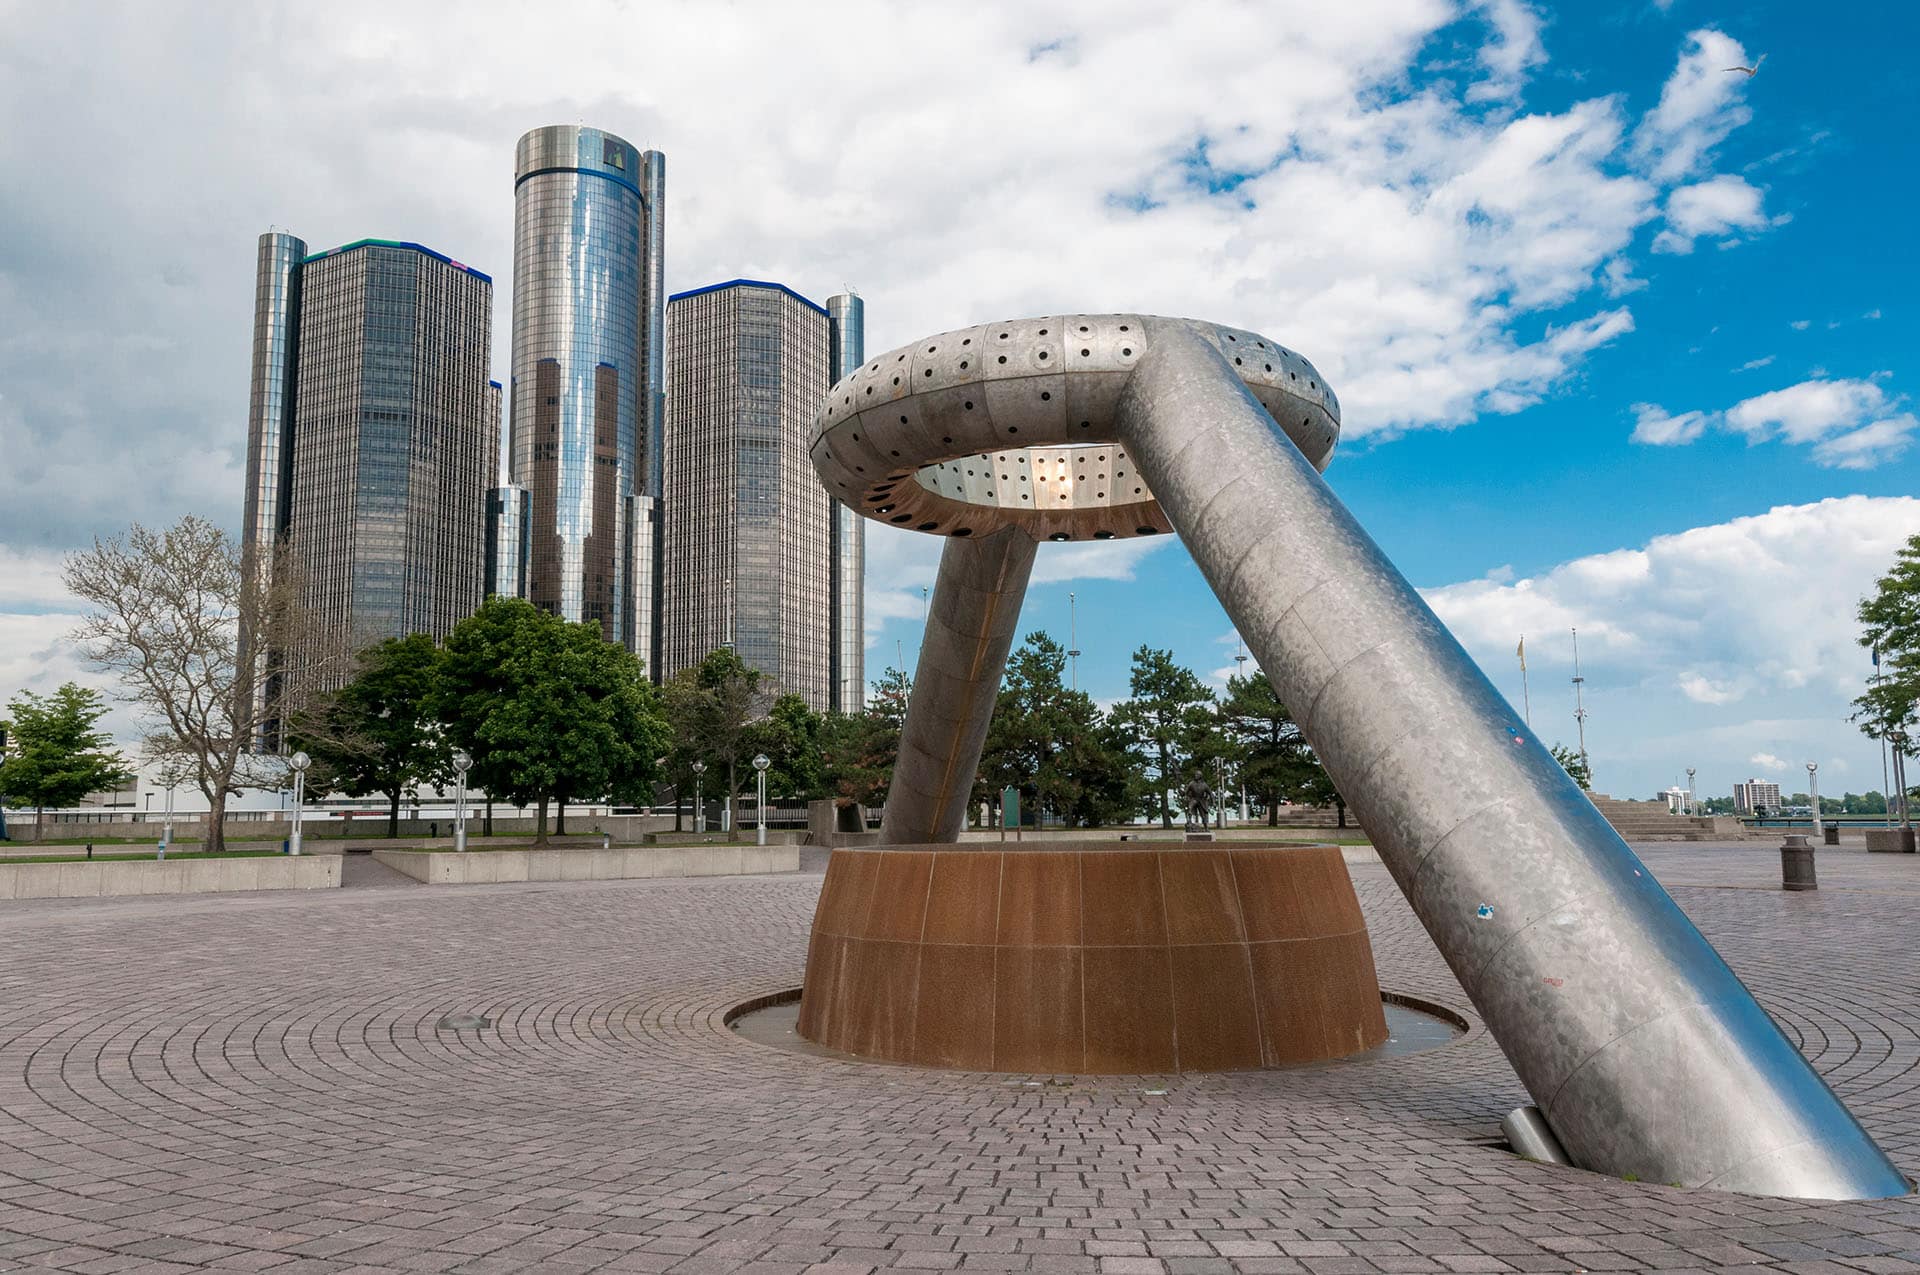 A public art sculpture stands prominently in the foreground with a large, modern, multi-tower glass building in the background. The scene depicts an urban square with trees, paved surfaces, and a partly cloudy sky overhead.